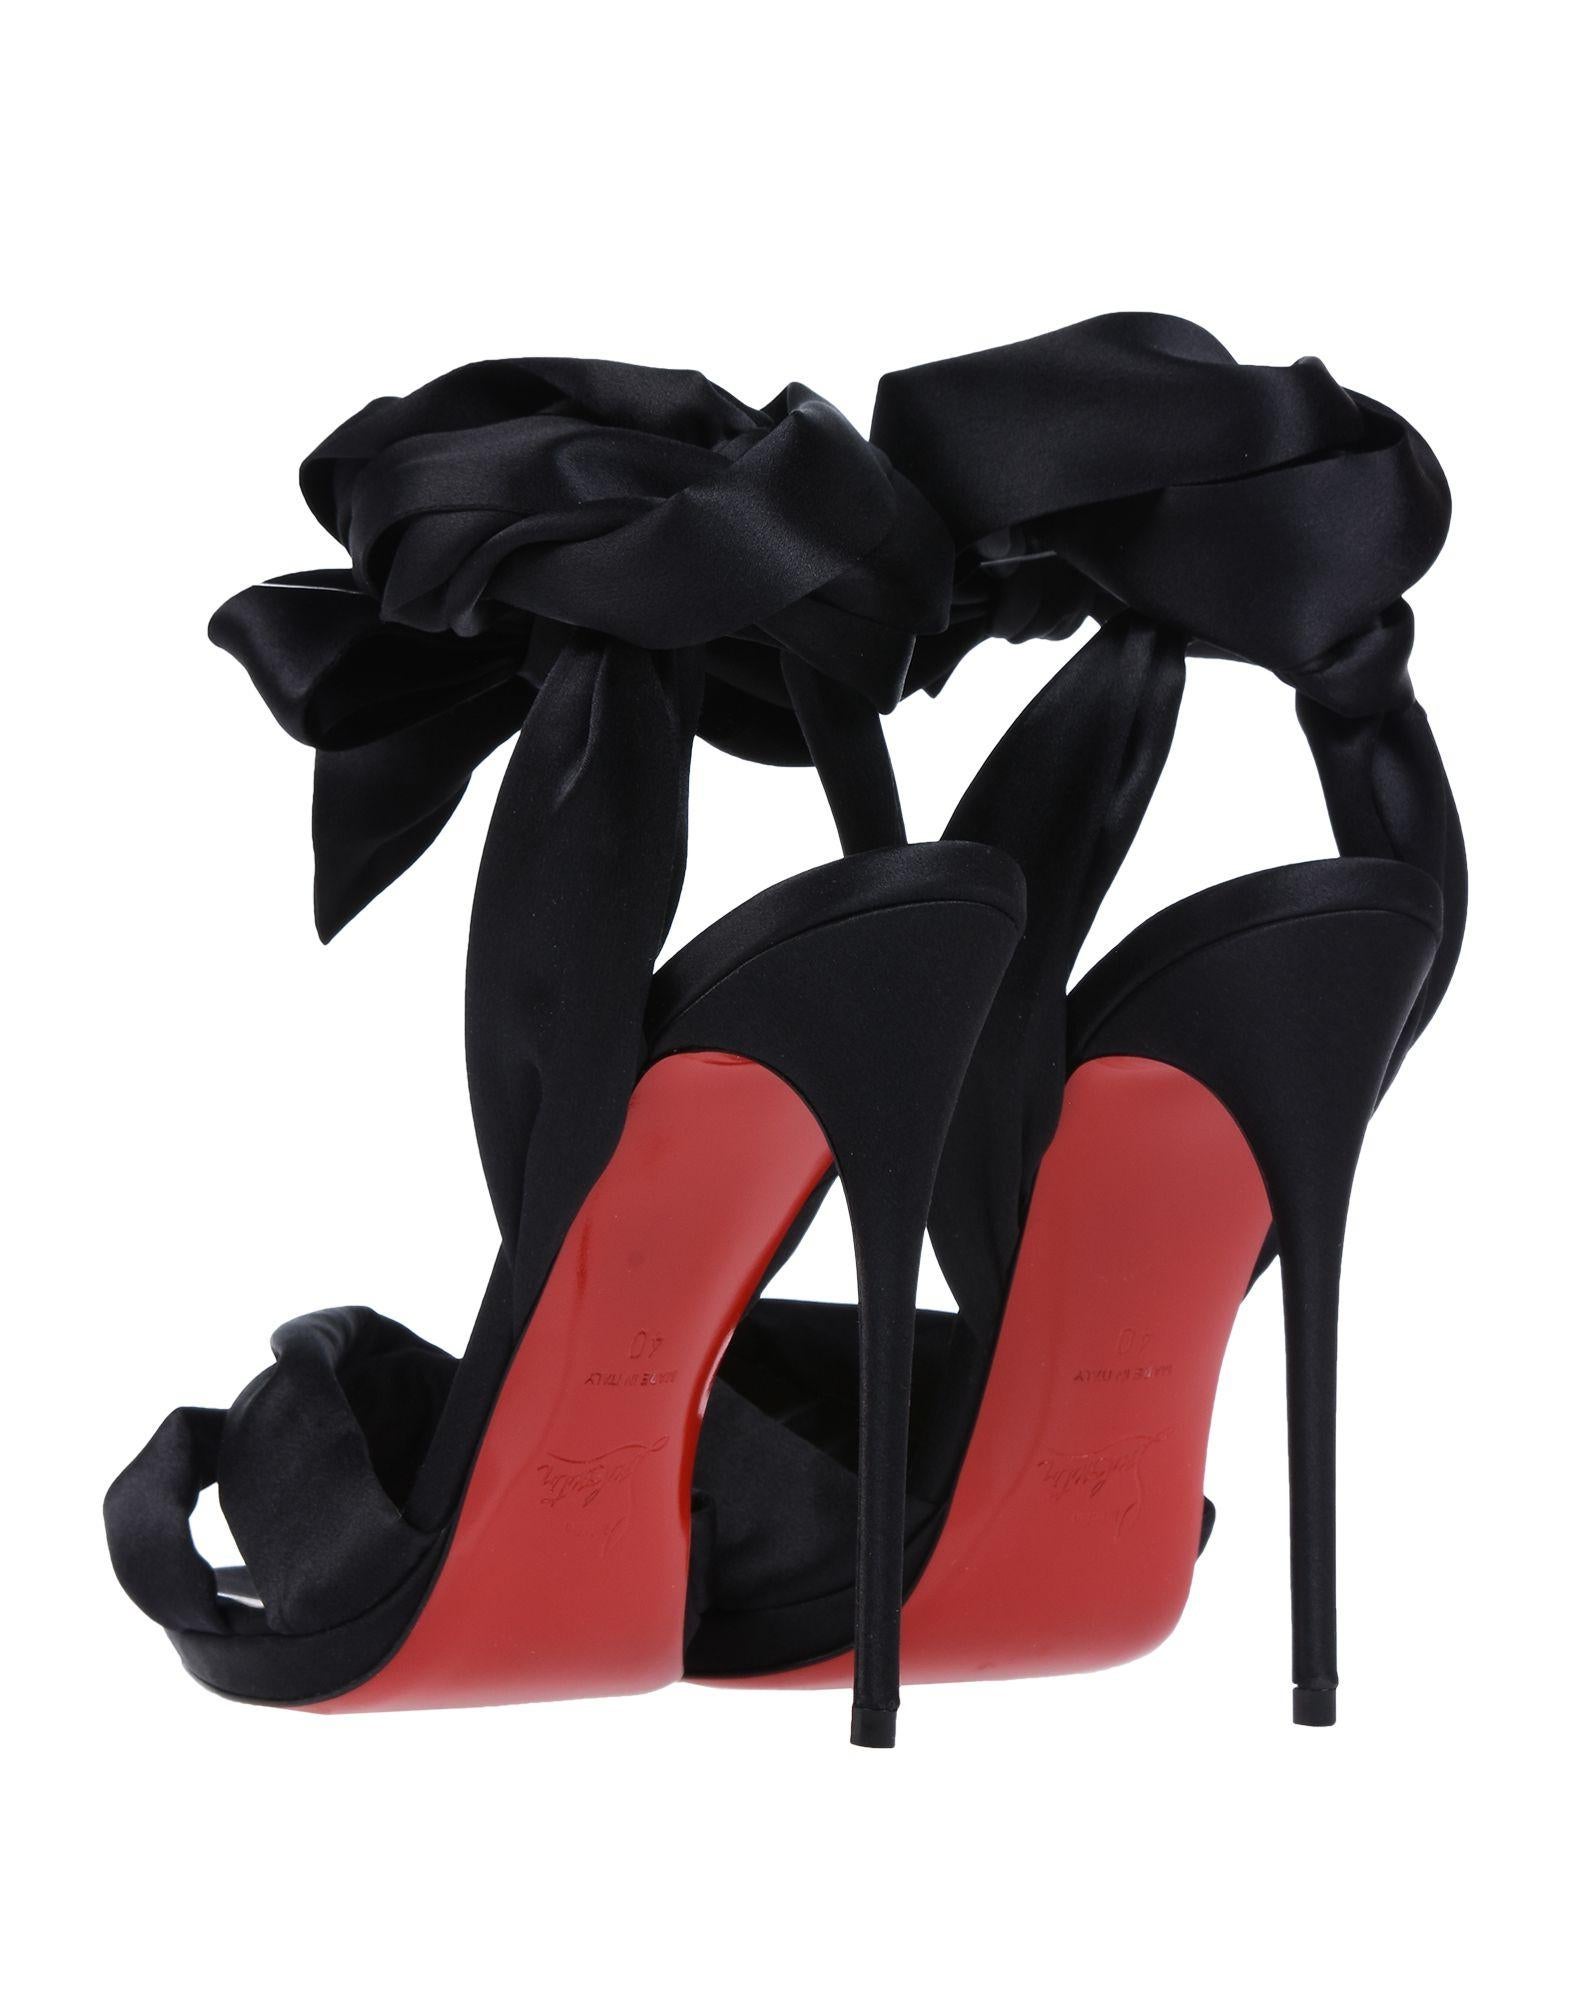 Christian Louboutin NEW Black Satin Bow Evening Sandals Pumps Heels in Box  1